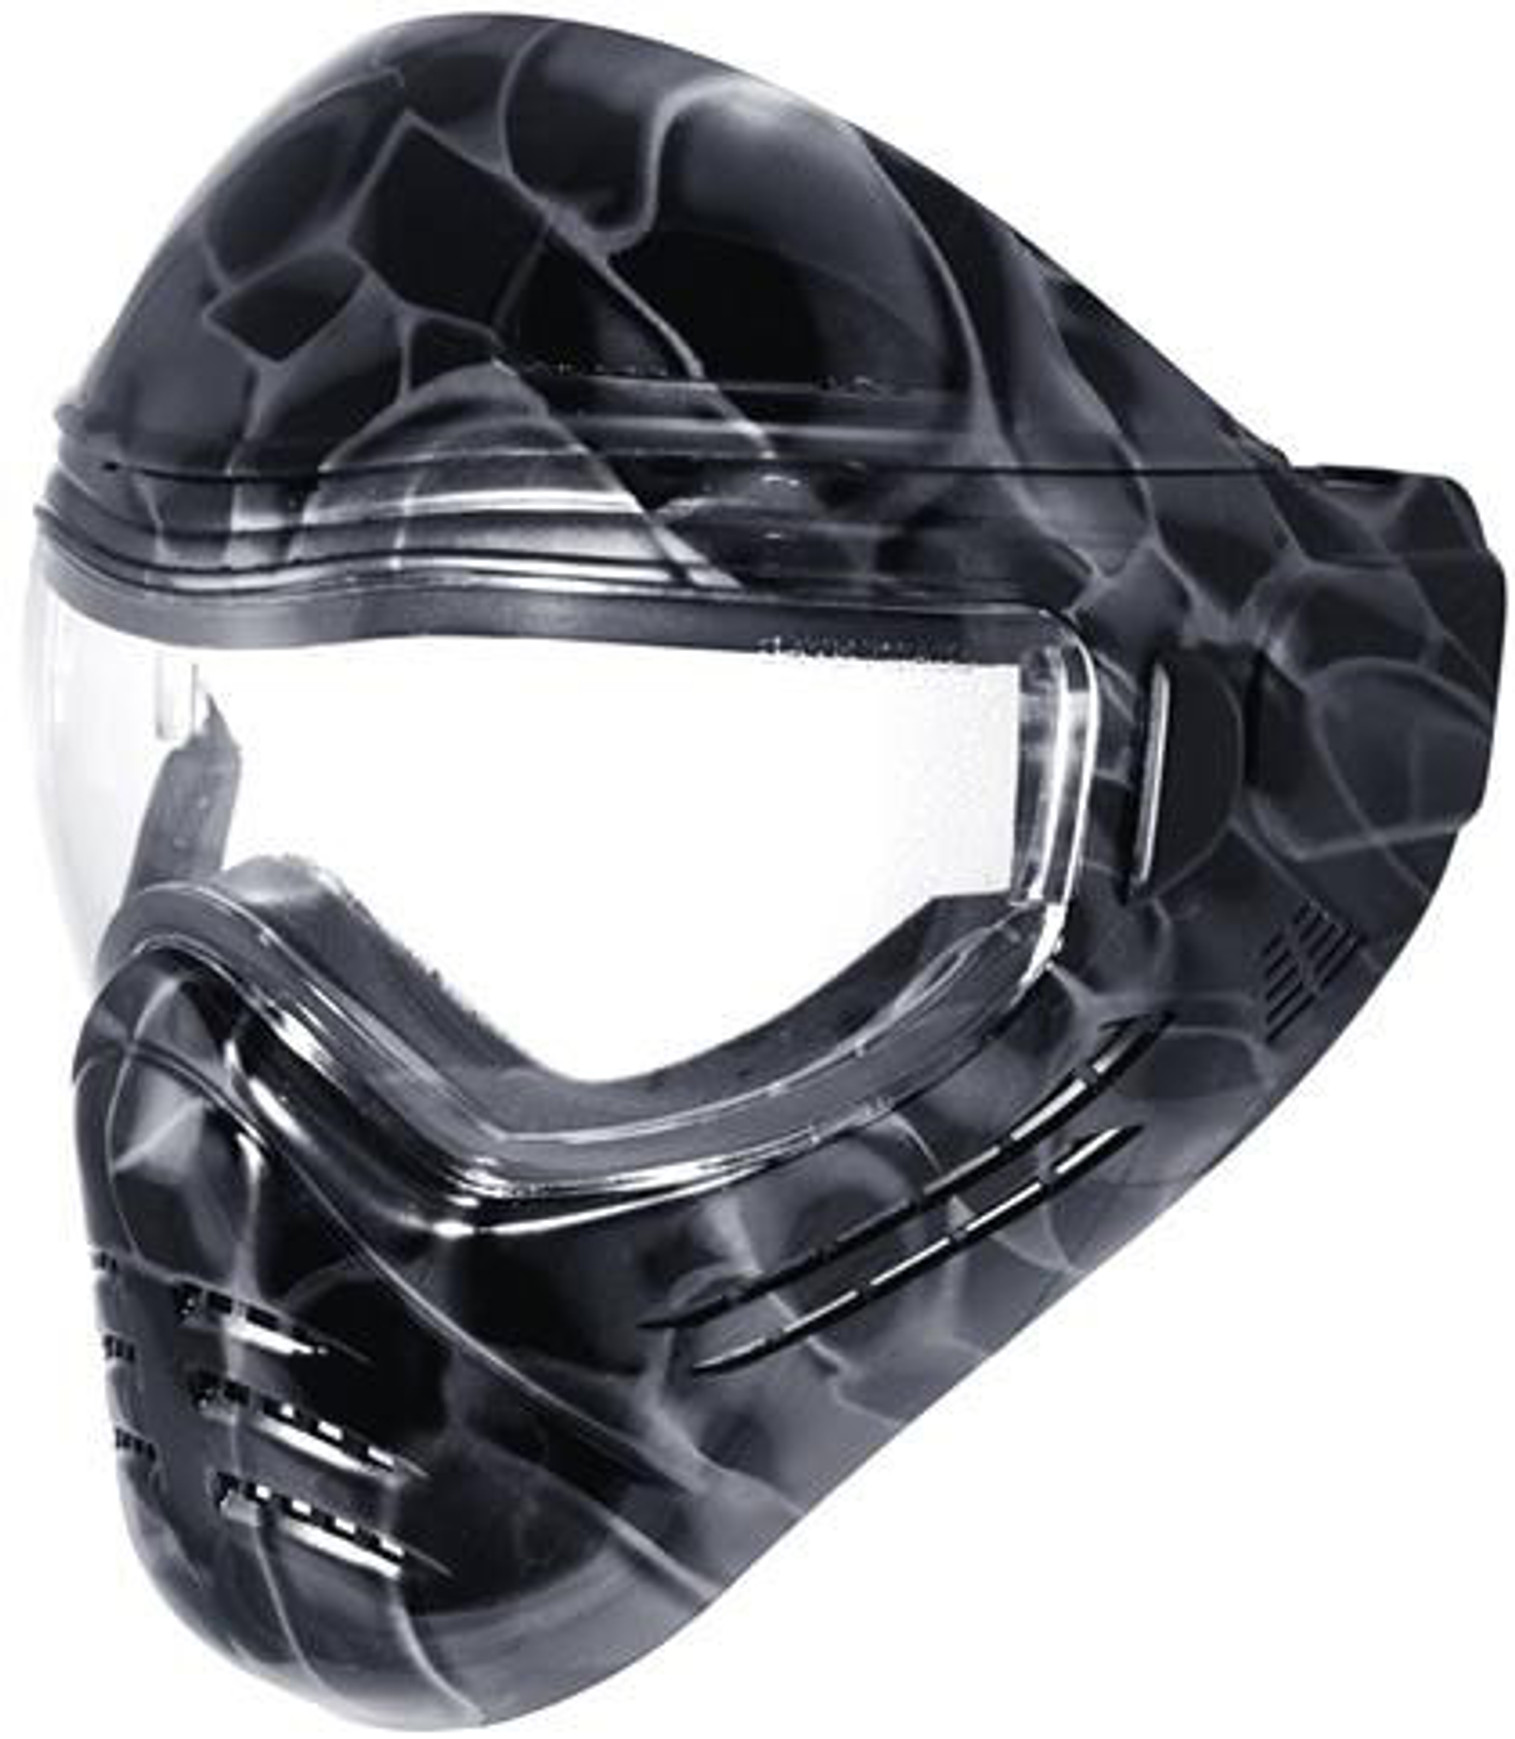 Save Phace Full Face Tactical Mask (Diss Series) - "Intimidator"